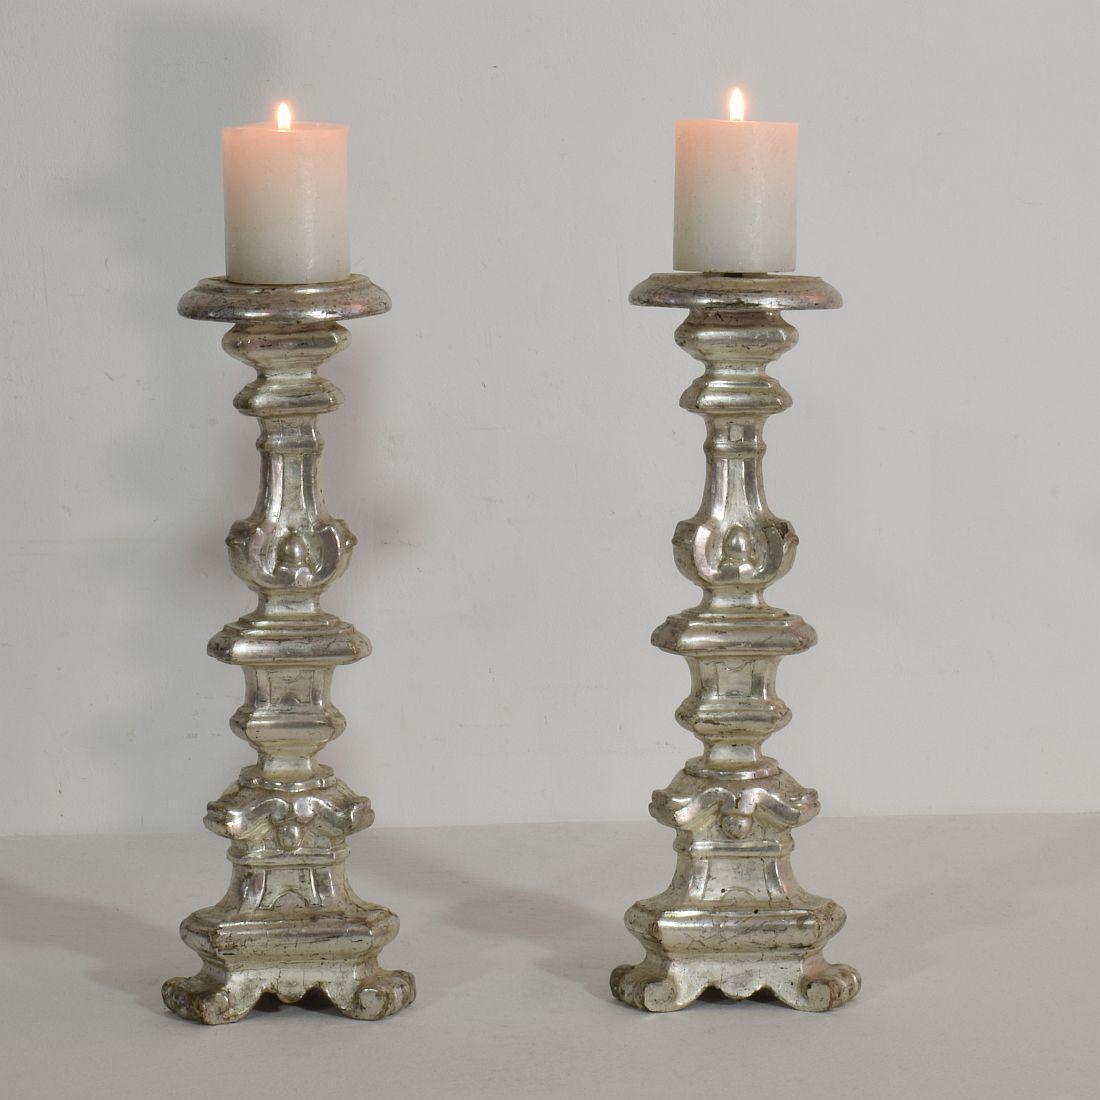 Great pair of carved wooden candleholders with their beautiful silver leaf,
Italy, circa 1750-1800.
Weathered and small losses.